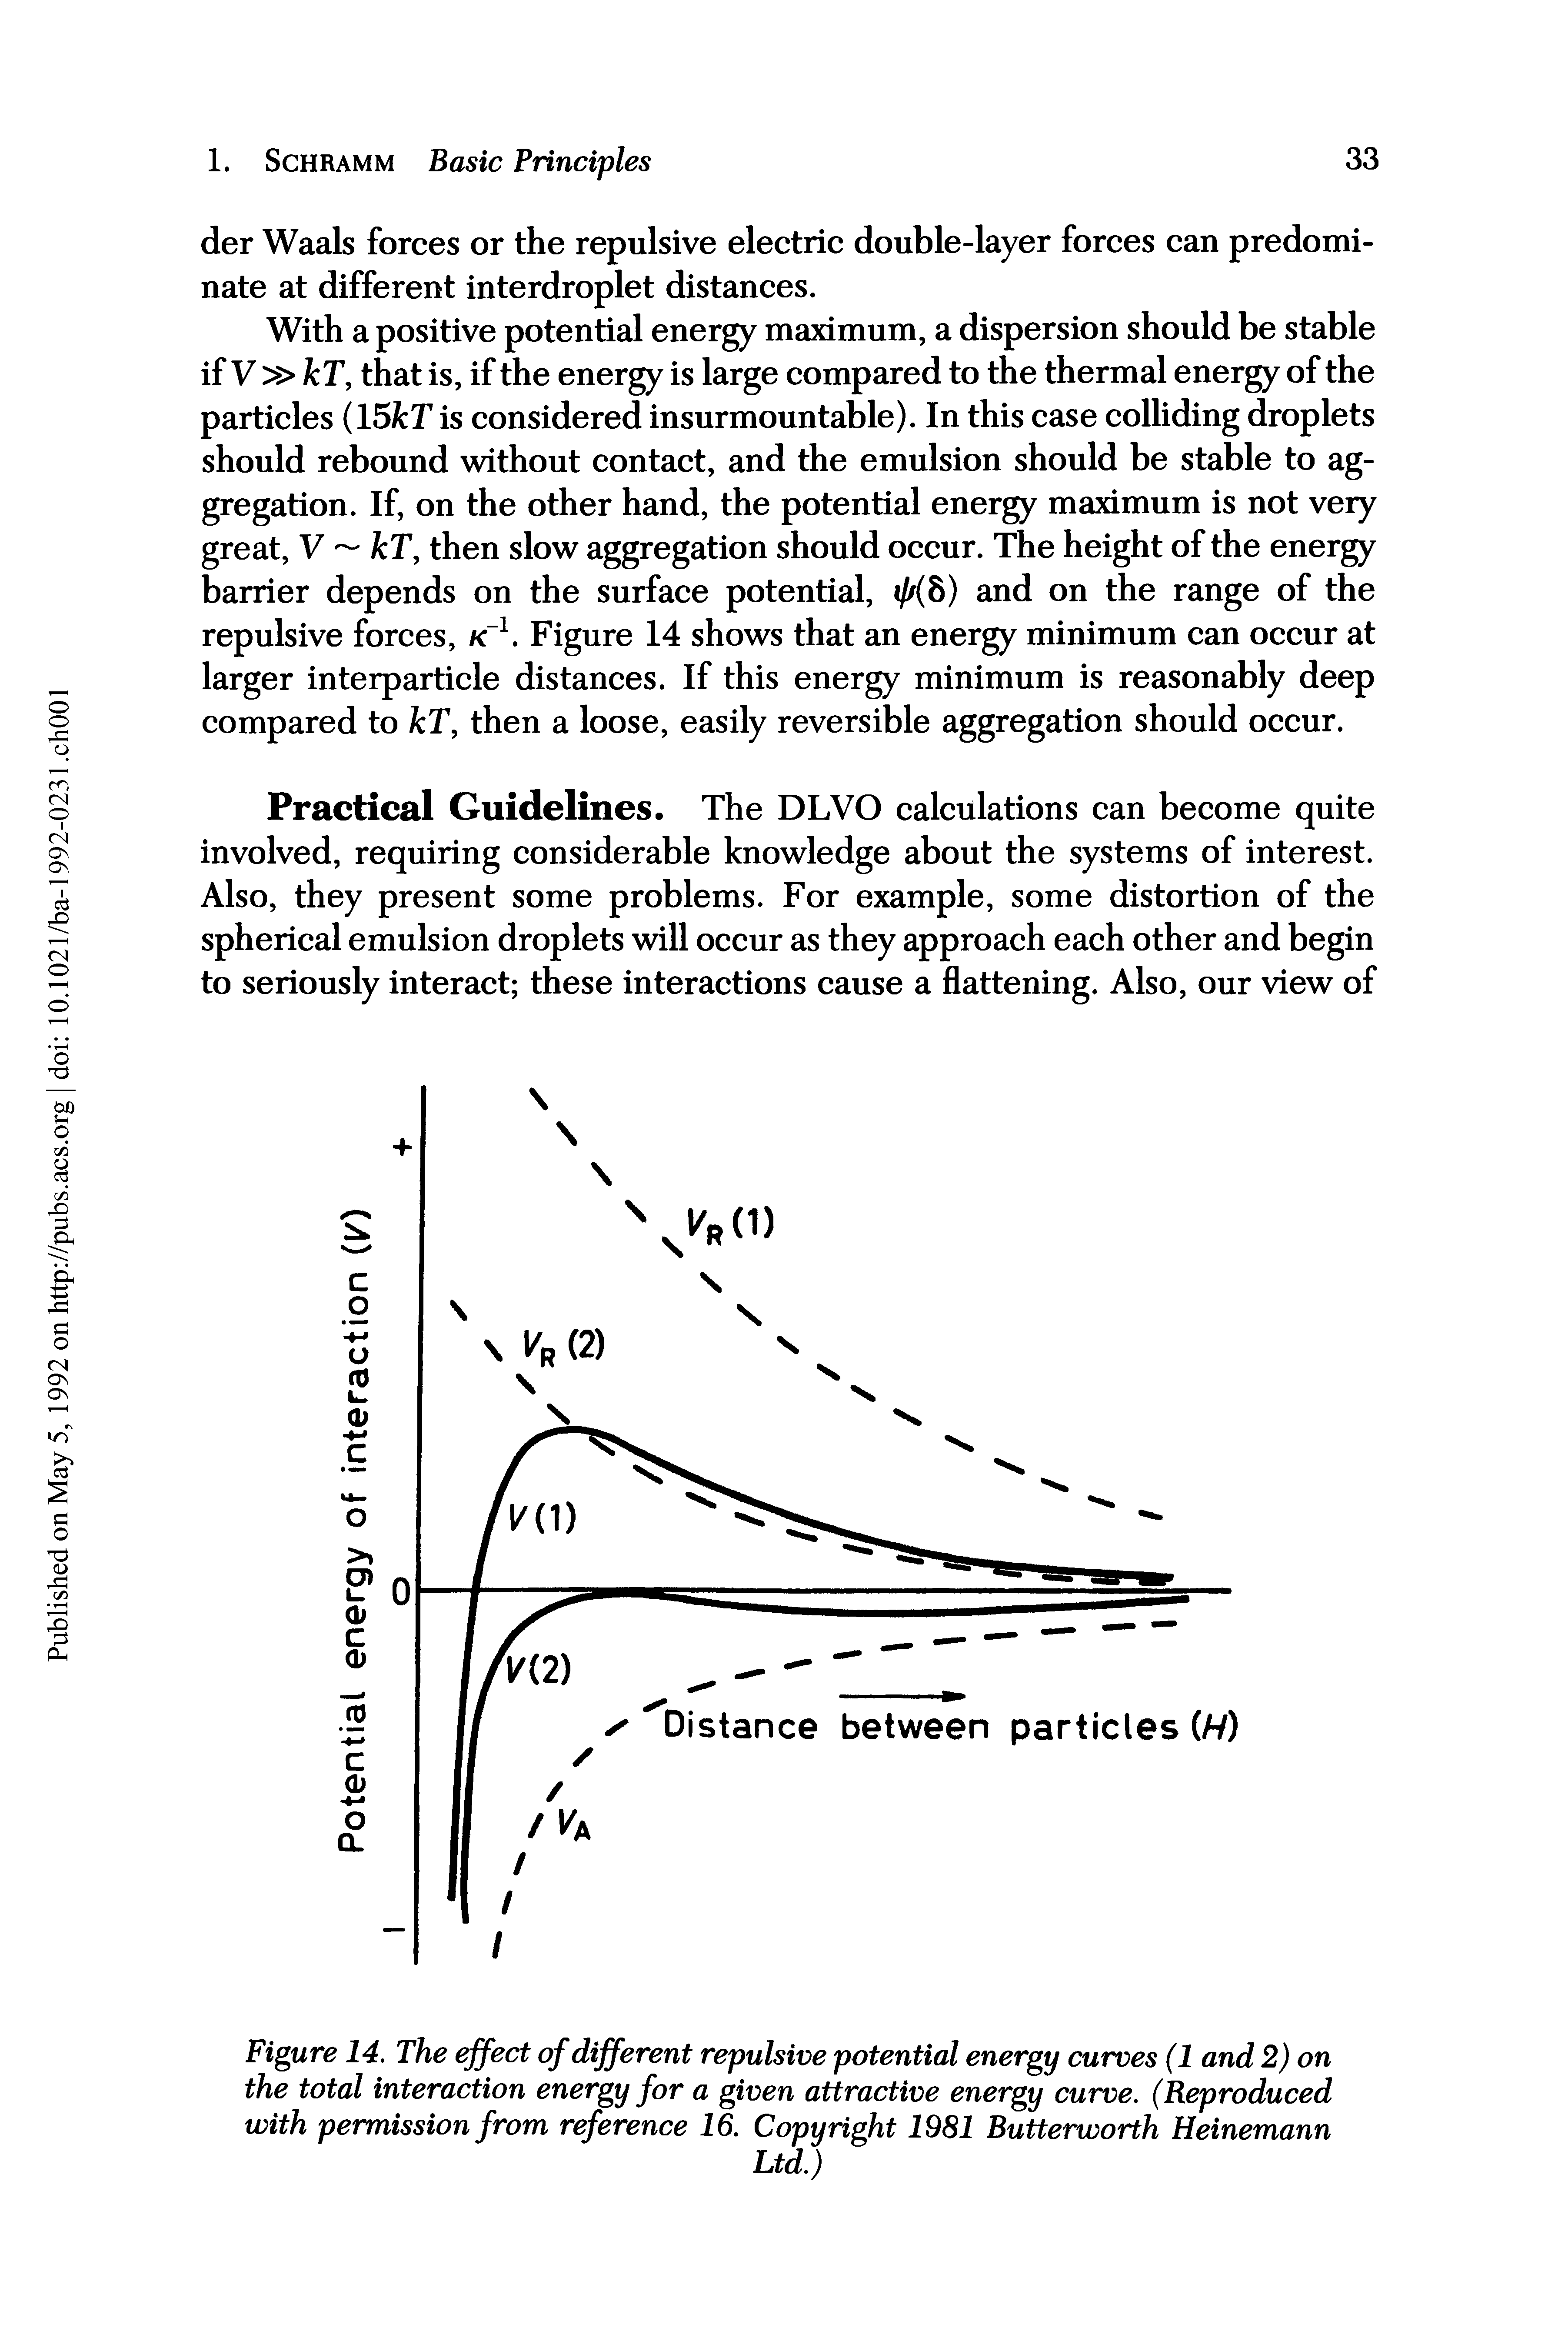 Figure 14. The effect of different repulsive potential energy curves (1 and 2) on the total interaction energy for a given attractive energy curve. (Reproduced with permission from reference 16. Copyright 1981 Butterworth Heinemann...